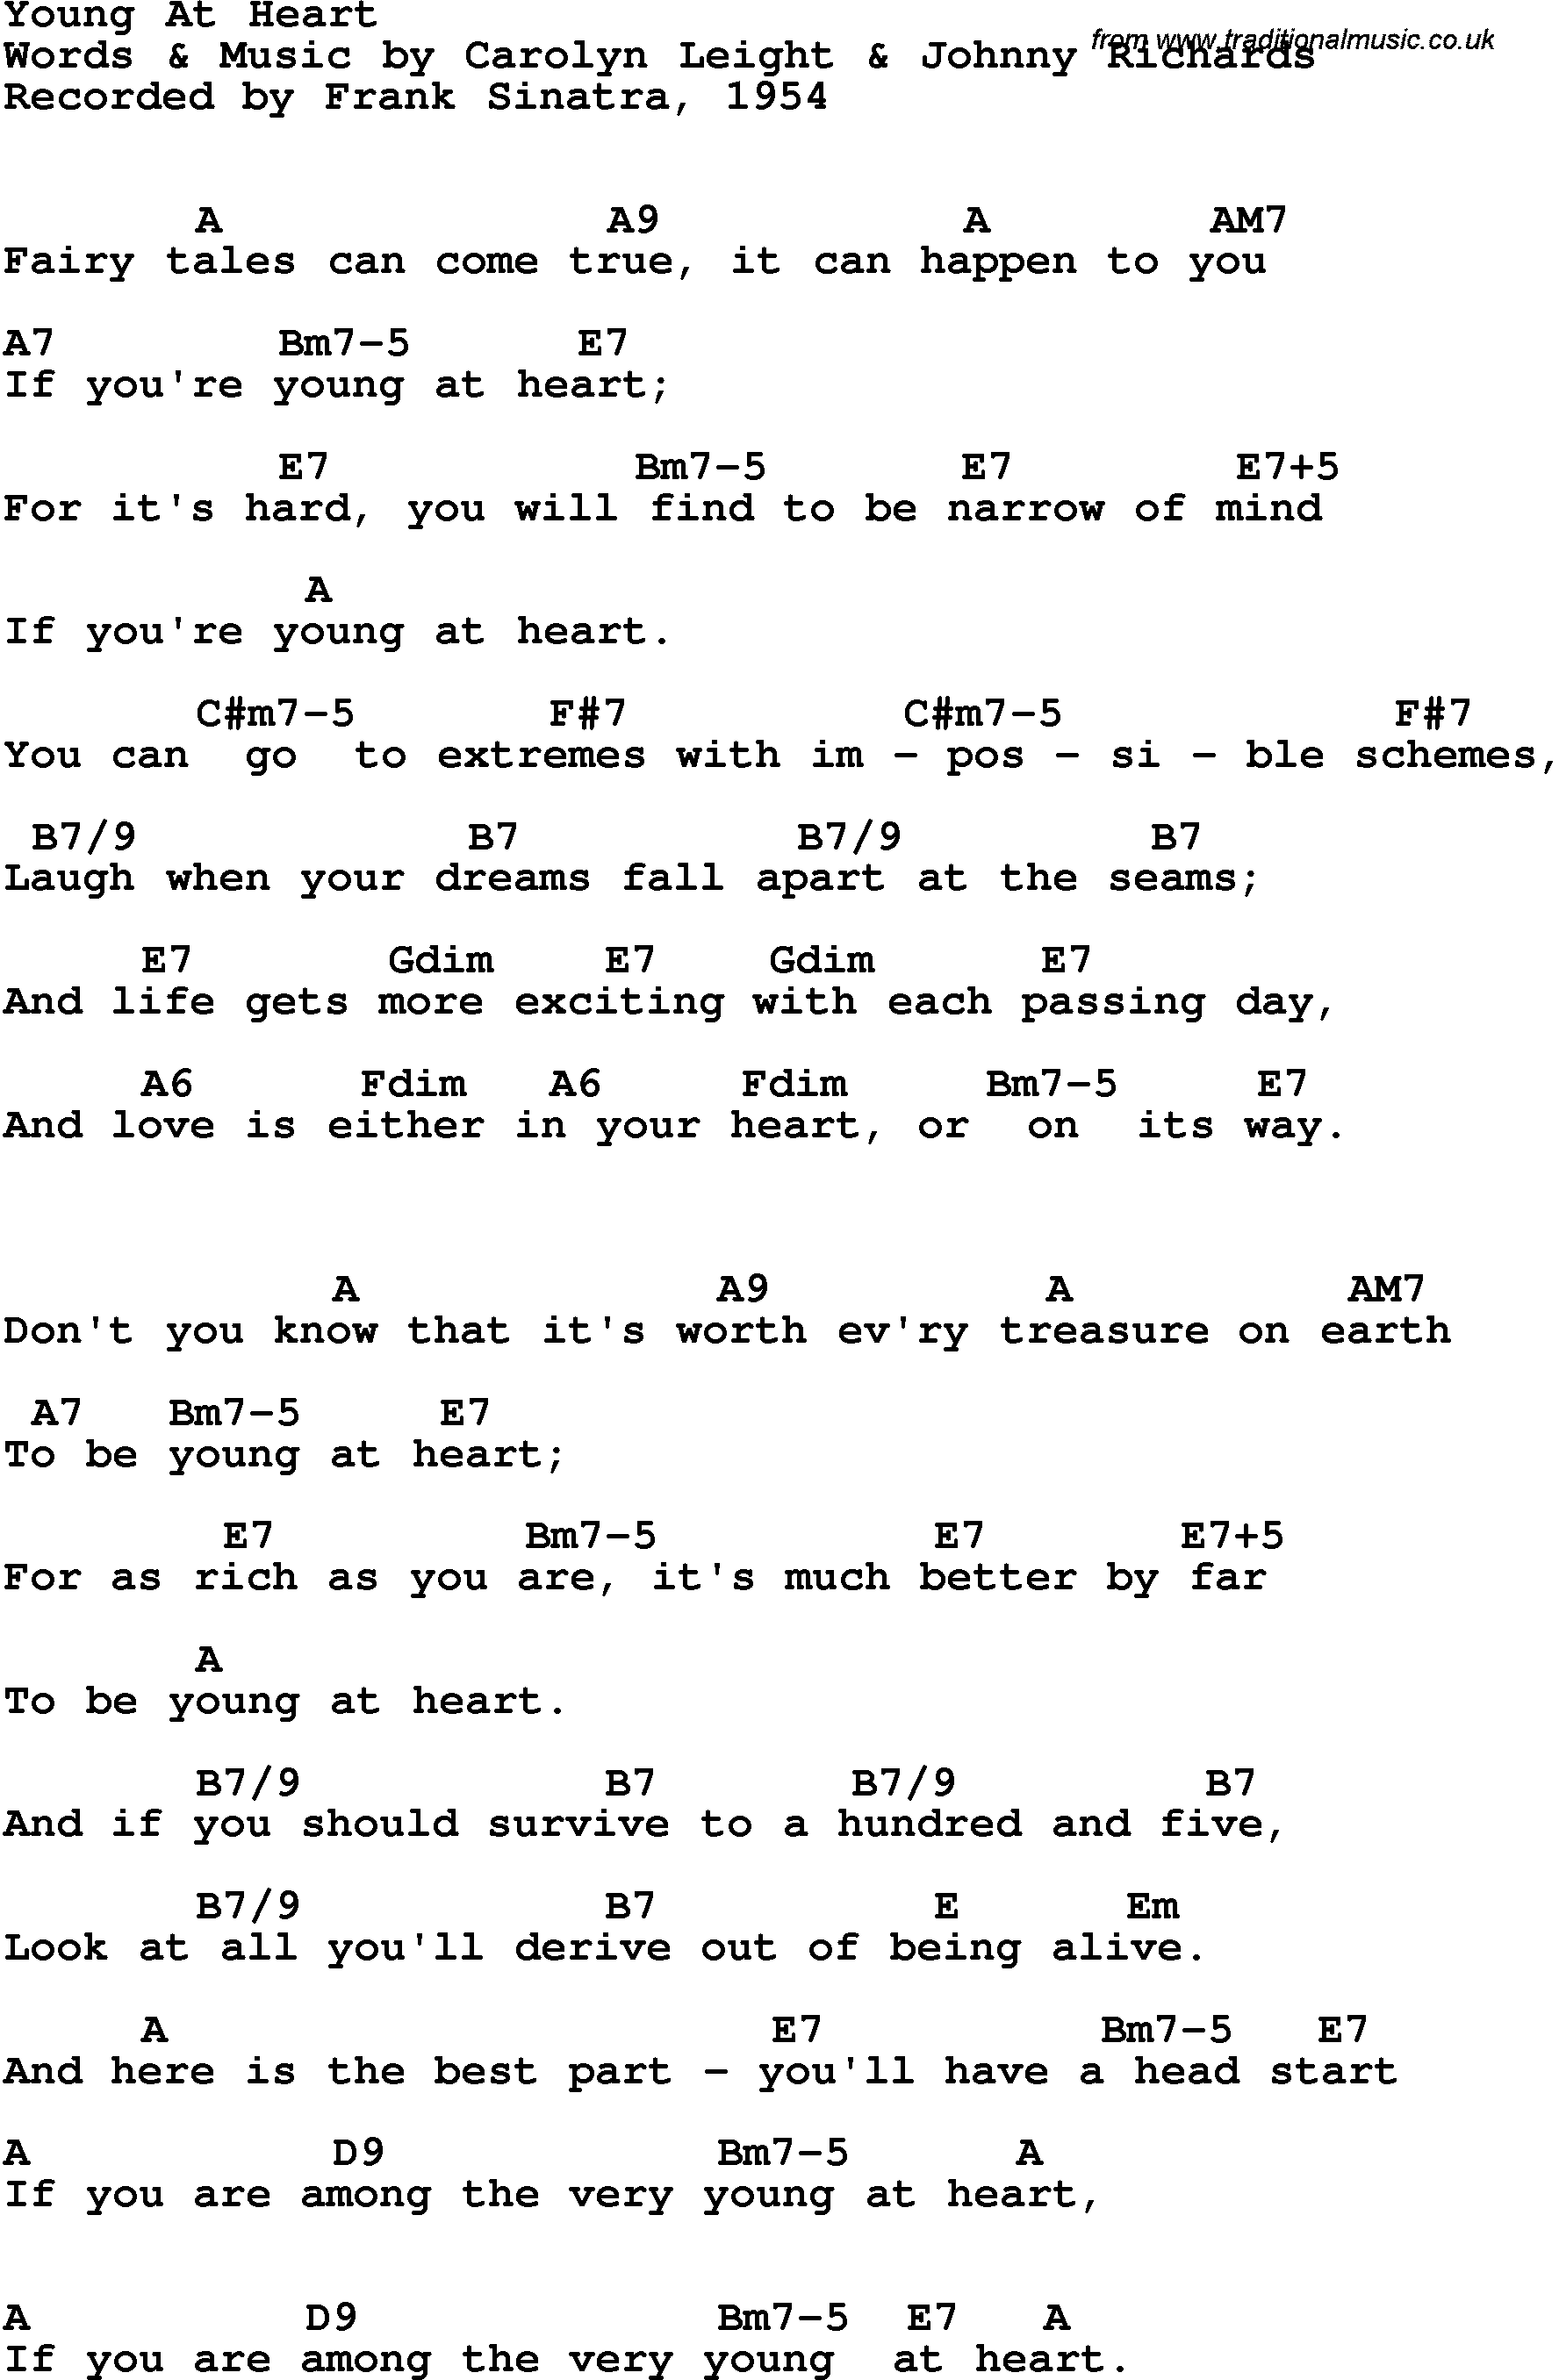 Song Lyrics with guitar chords for Young At Heart - Frank Sinatra, 1954